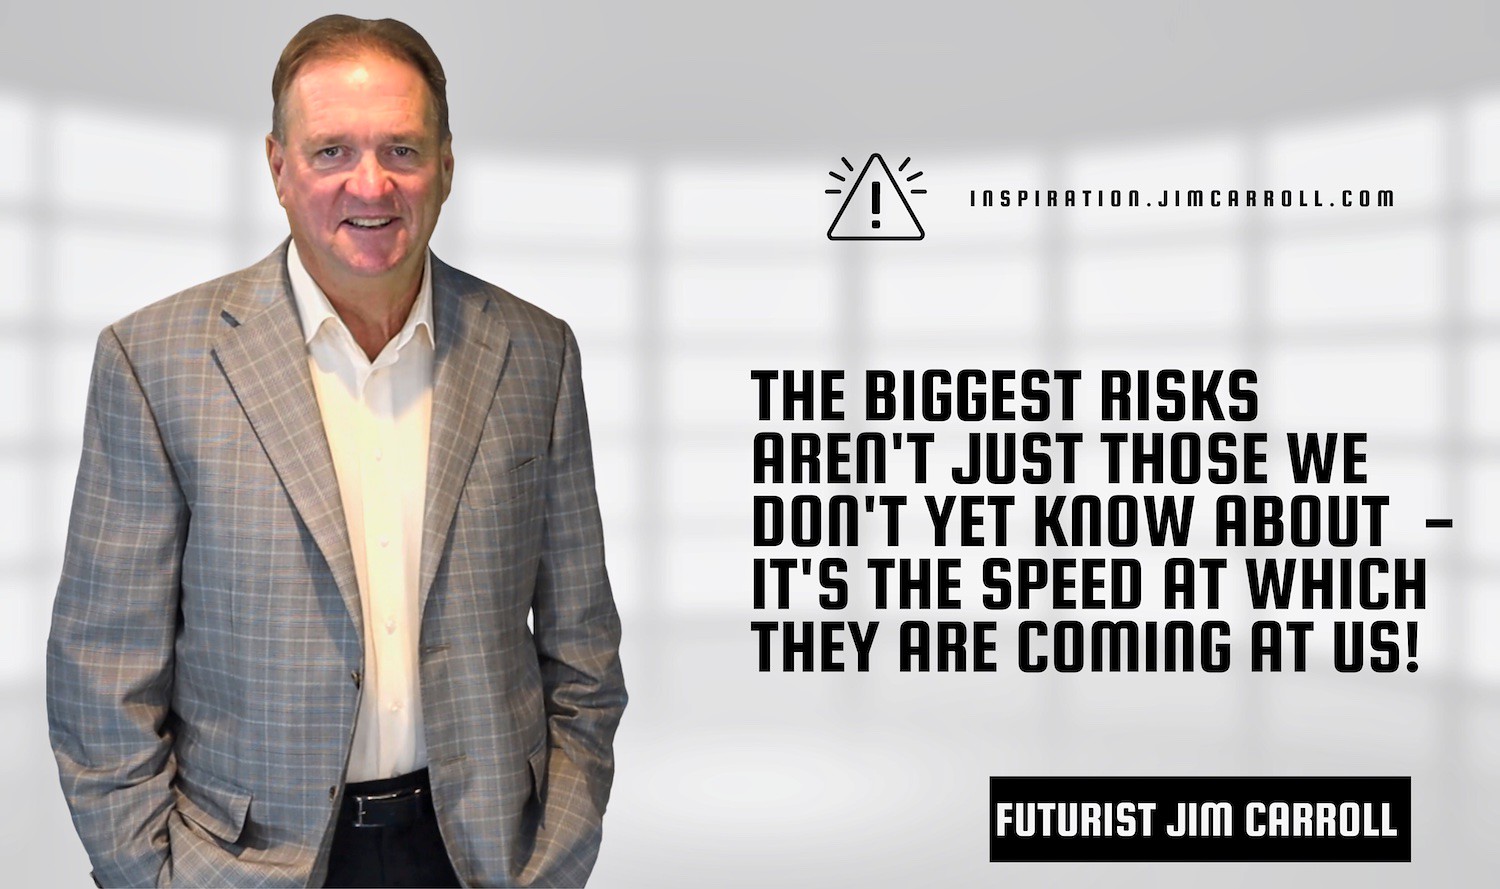 "The biggest risks aren't just those we don't yet know about - it's the speed at which they are coming at us!"